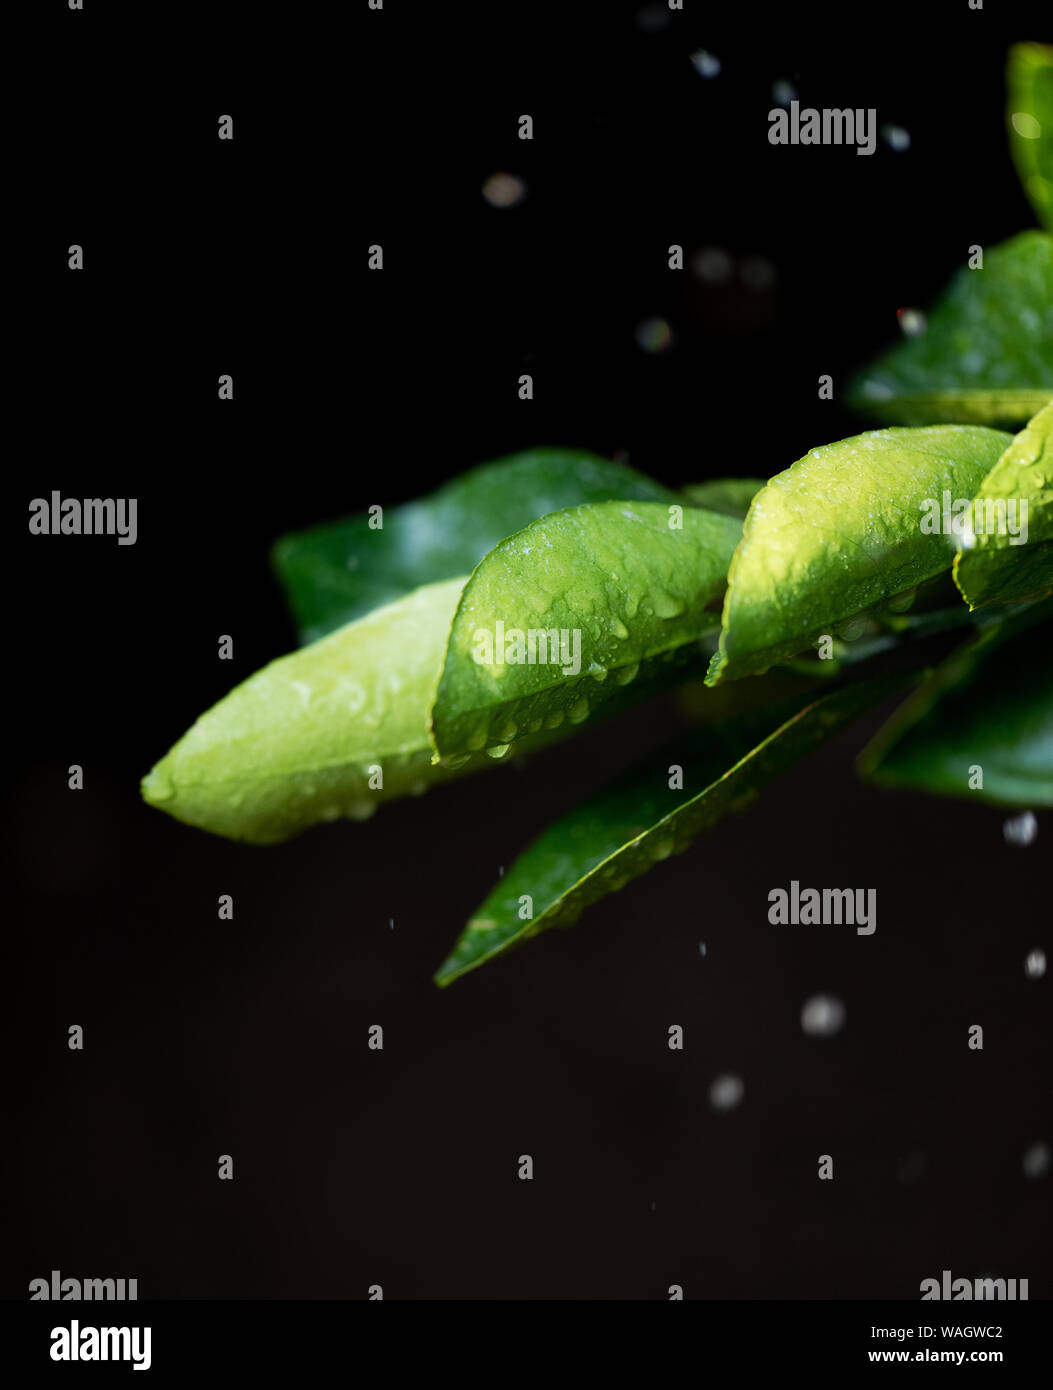 Citrus tree leaves with drops of water on black background Stock Photo